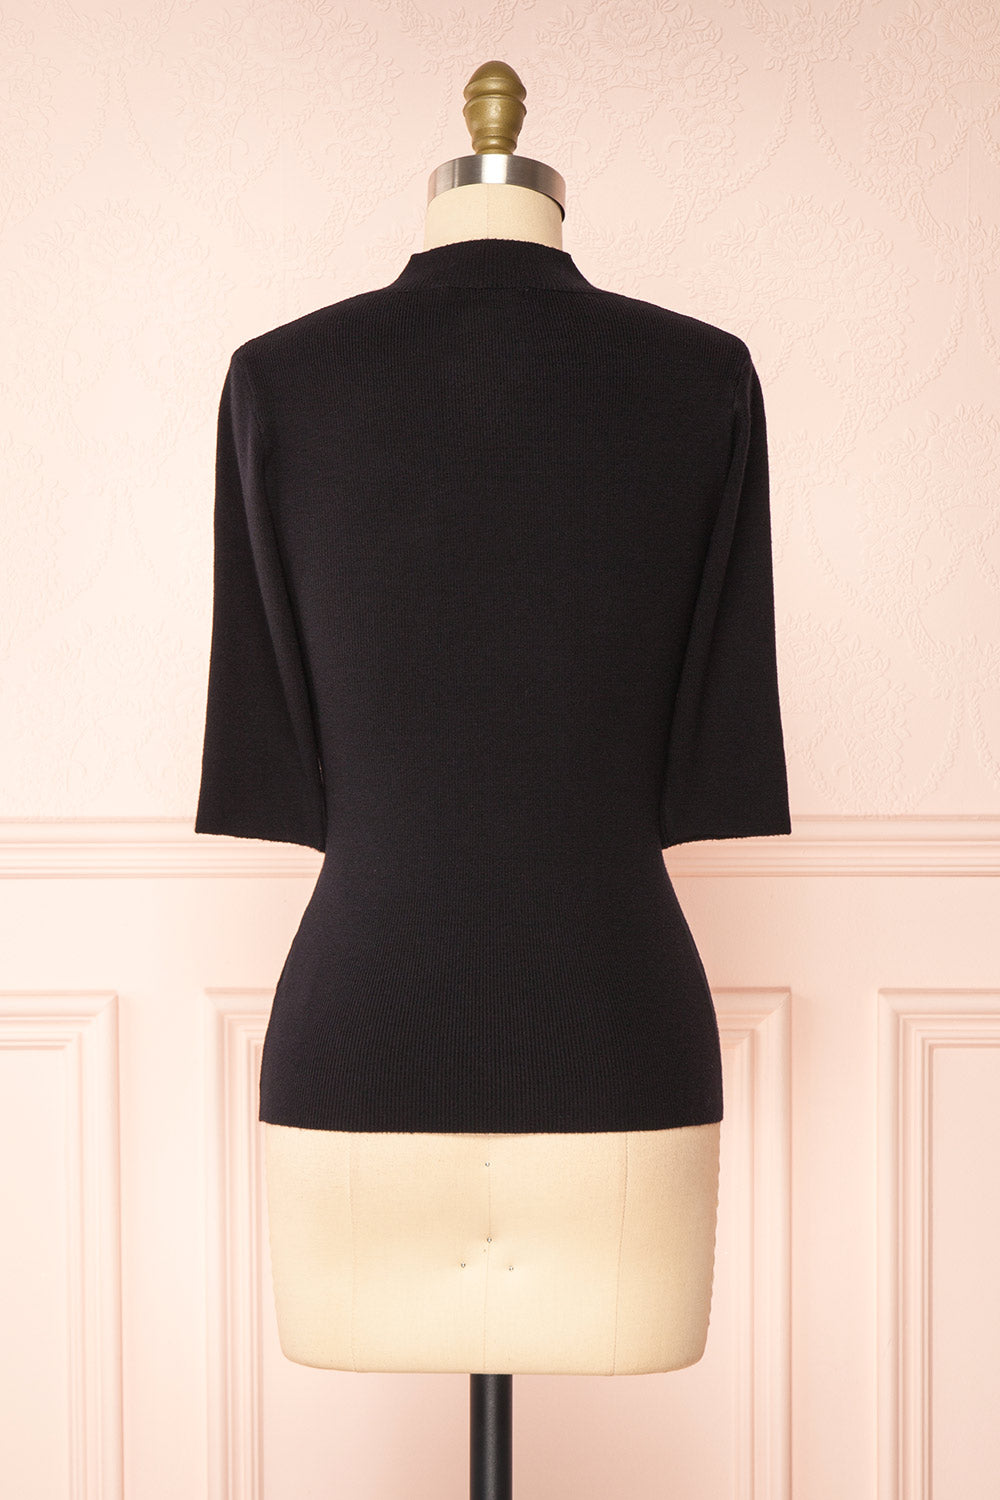 Nalleli Black Fitted Mock Top w/ Half Sleeves | Boutique 1861 back view